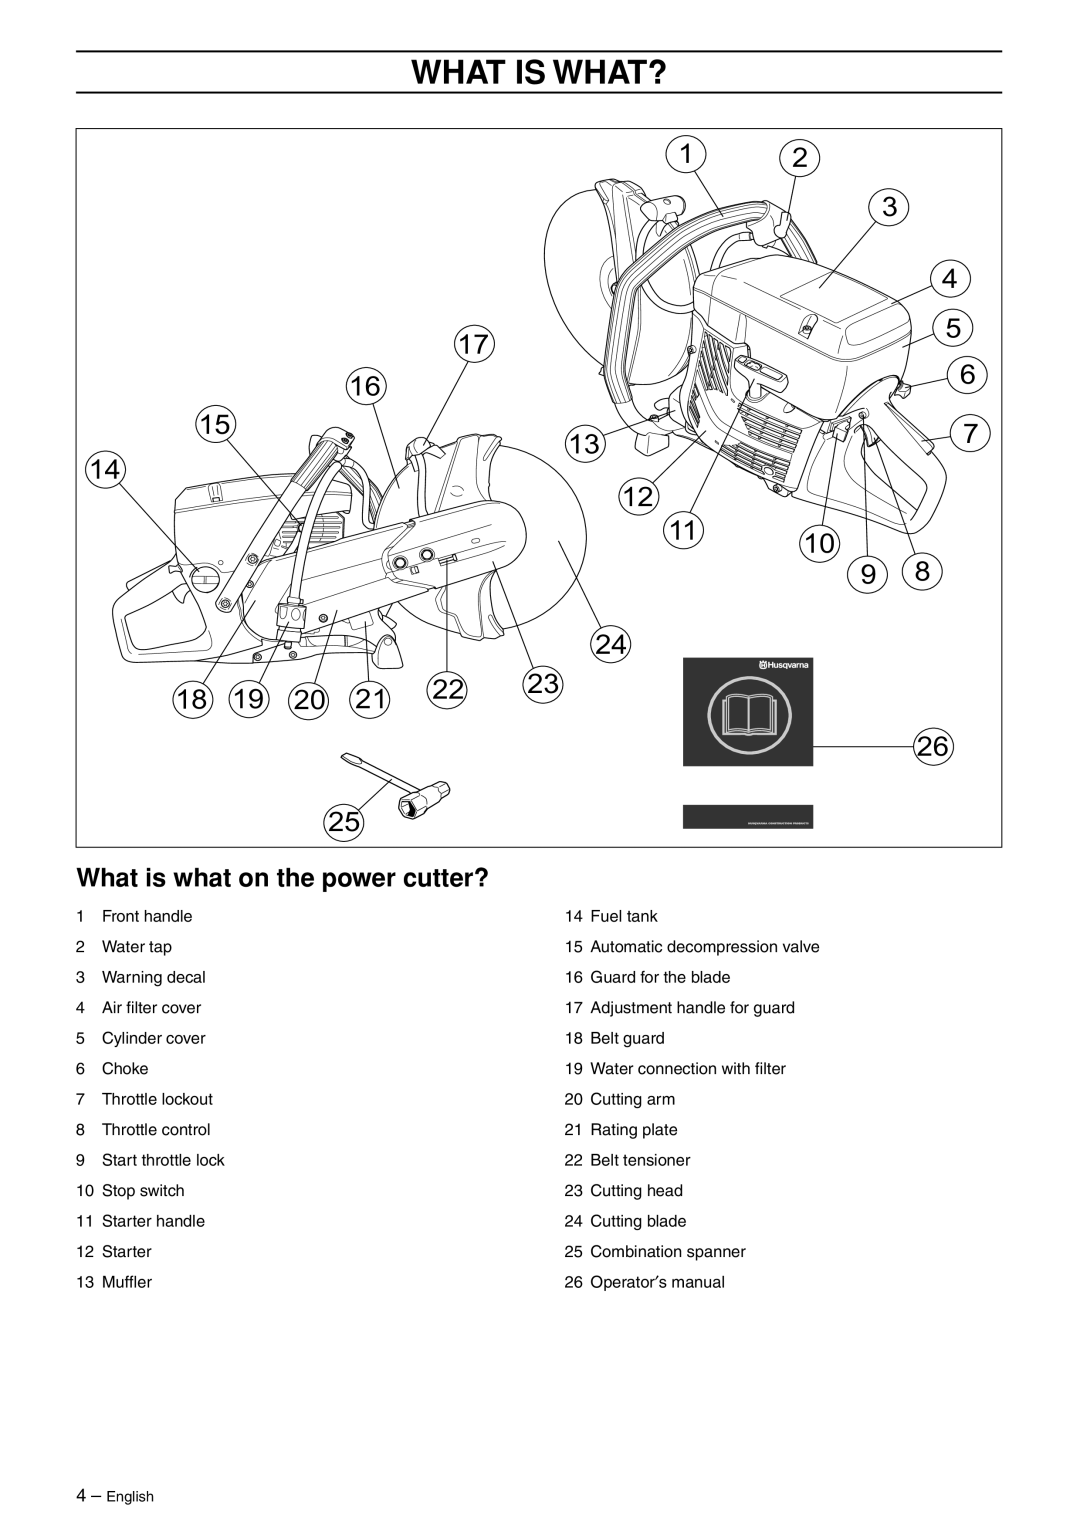 Husqvarna K750 manual What Is What?, What is what on the power cutter? 